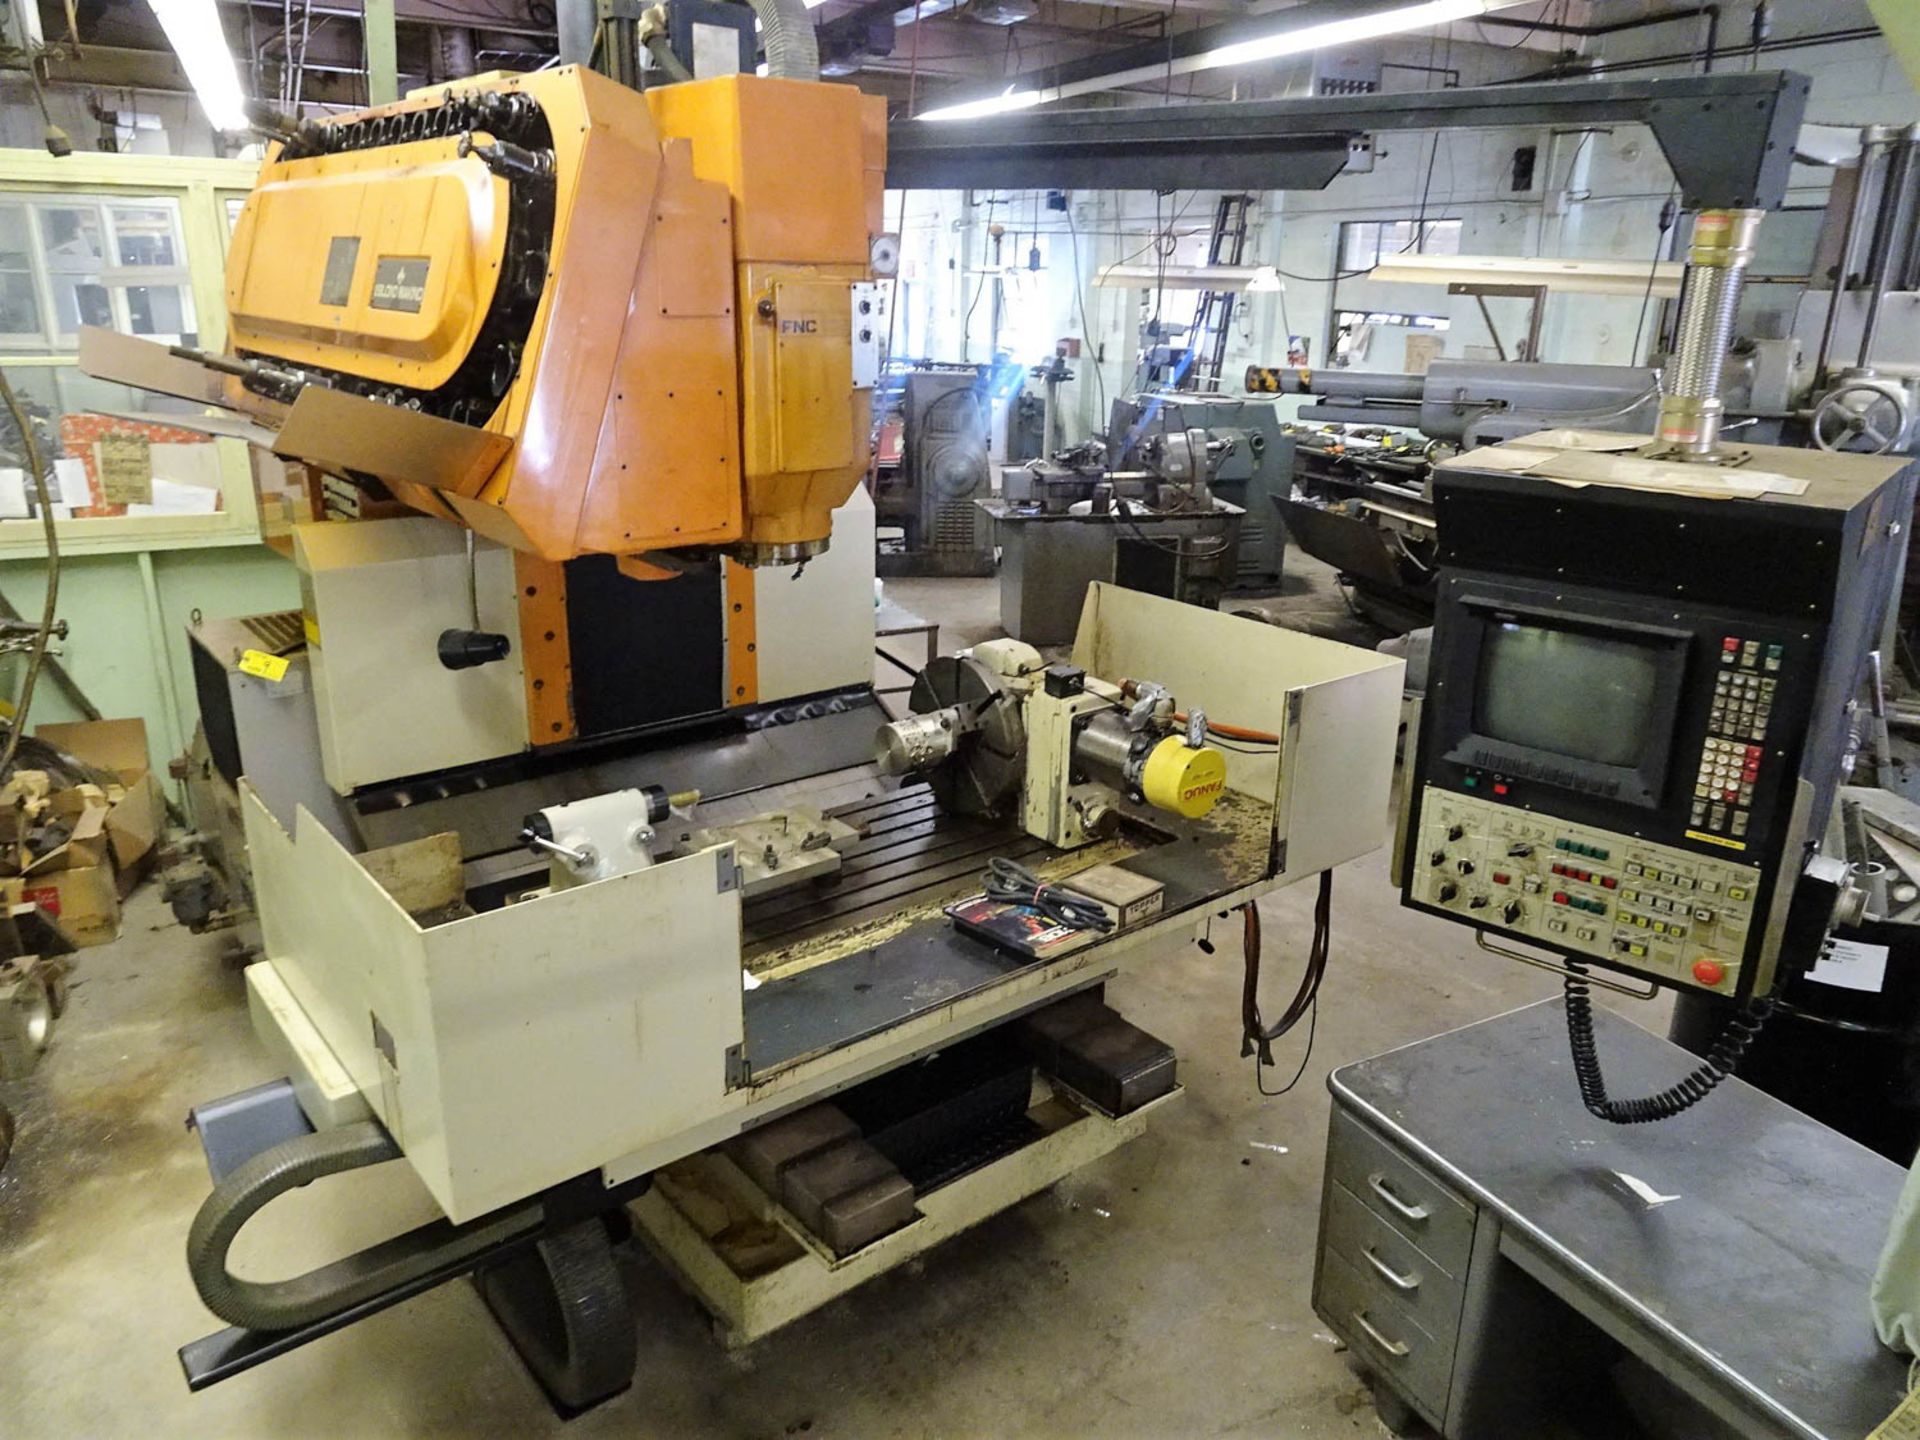 LEBLOND MAKINO MDL. FNC 106 CNC VERTICAL MACHINING CENTER, WITH 24" X 55" TABLE, MAKINO ROTARY